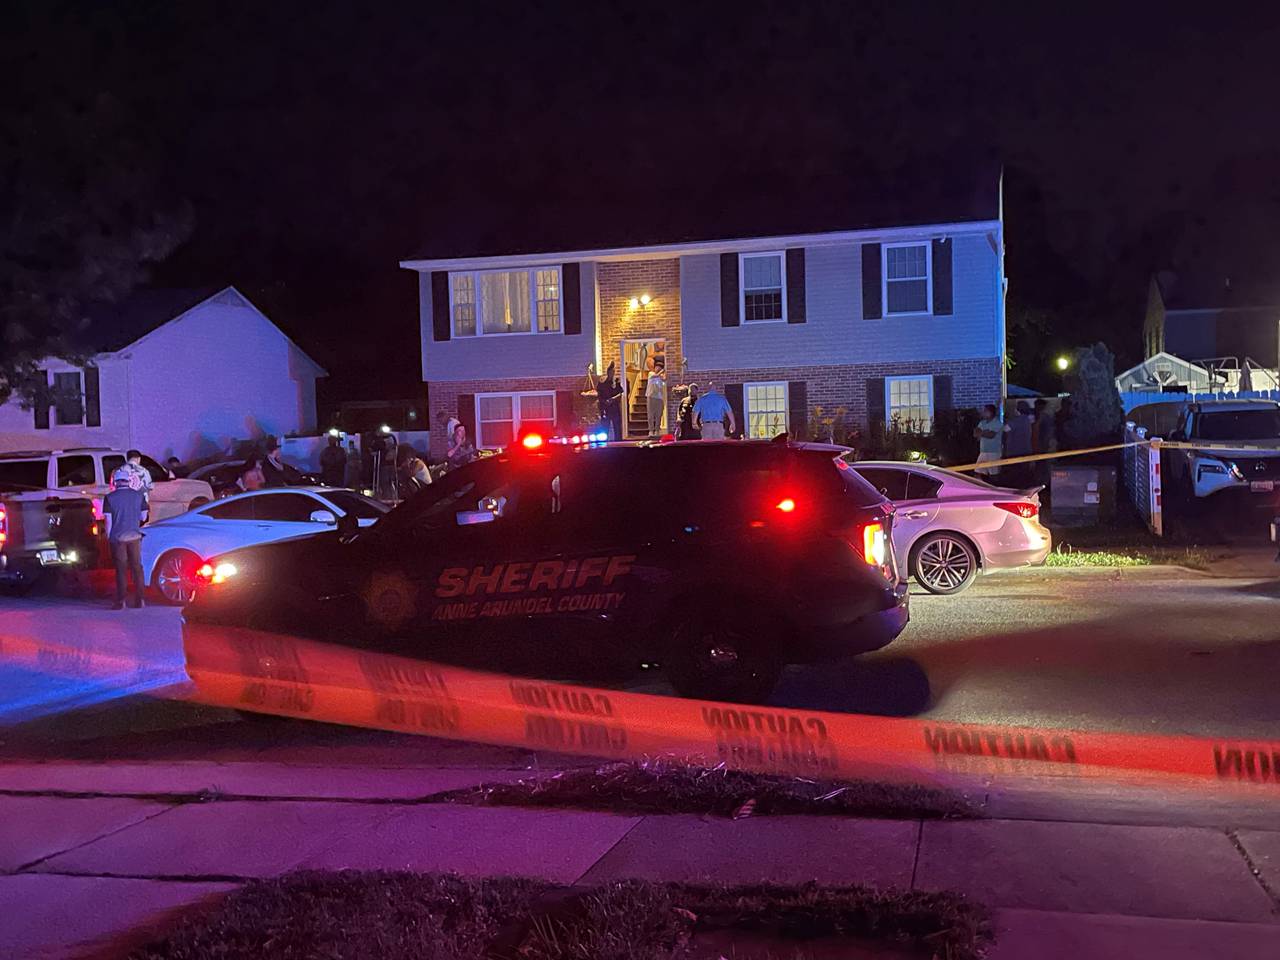 Annapolis police respond to a quadruple shooting on Paddington Place near Edgewood on Sunday night, June 11, 2023. At least one person was killed.